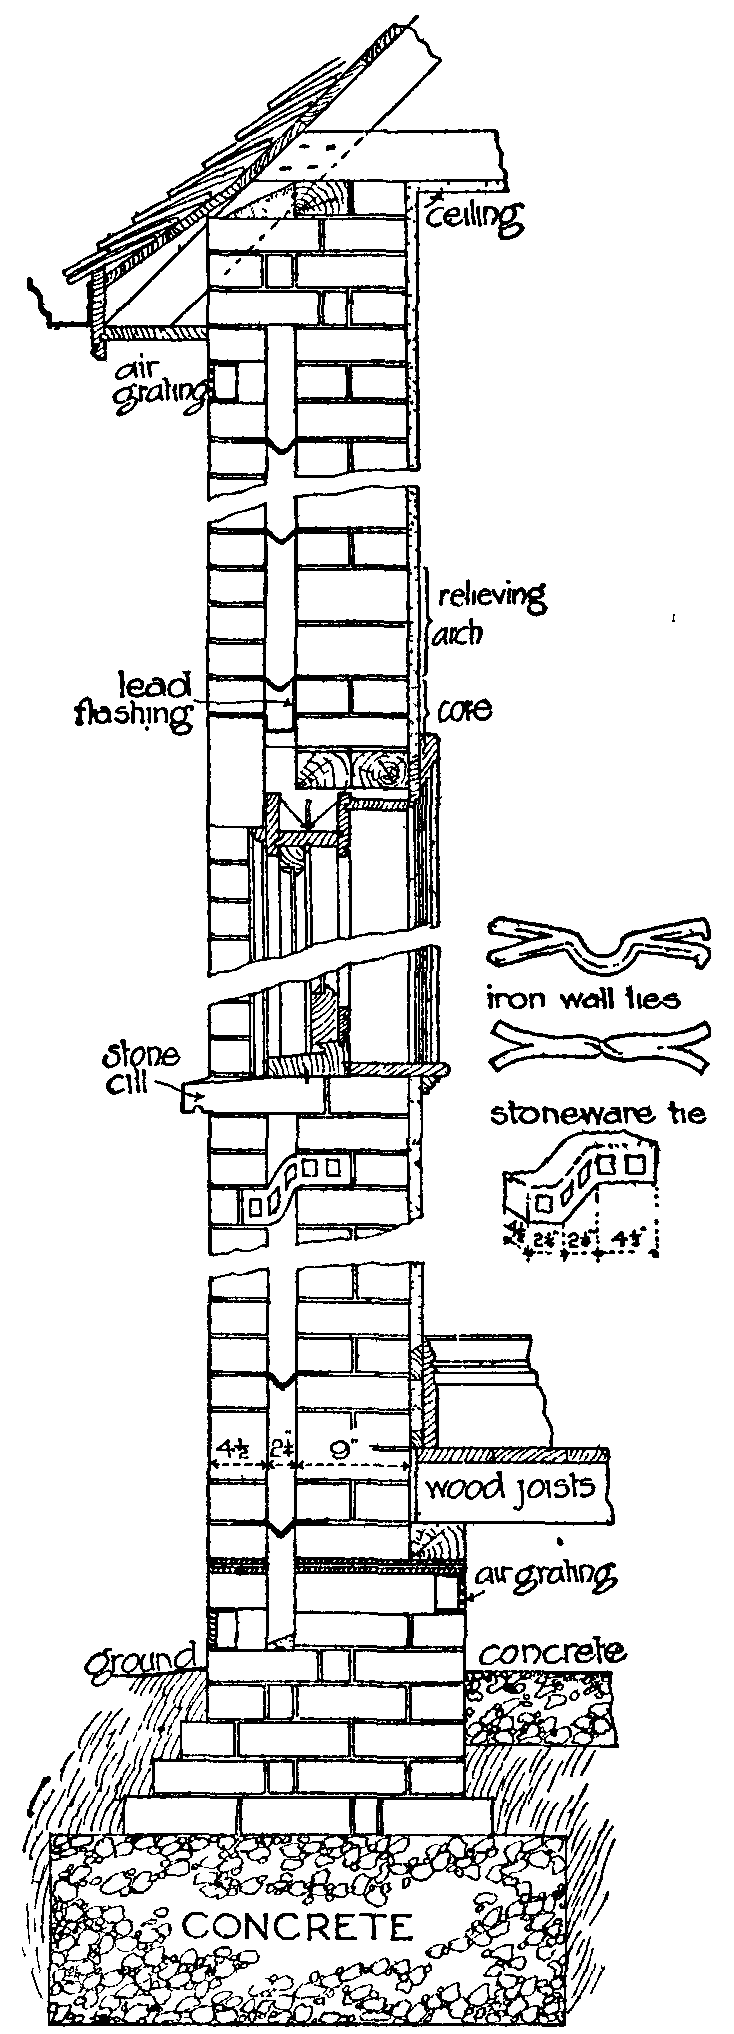 Fig. 2.--Section of a Hollow Wall.